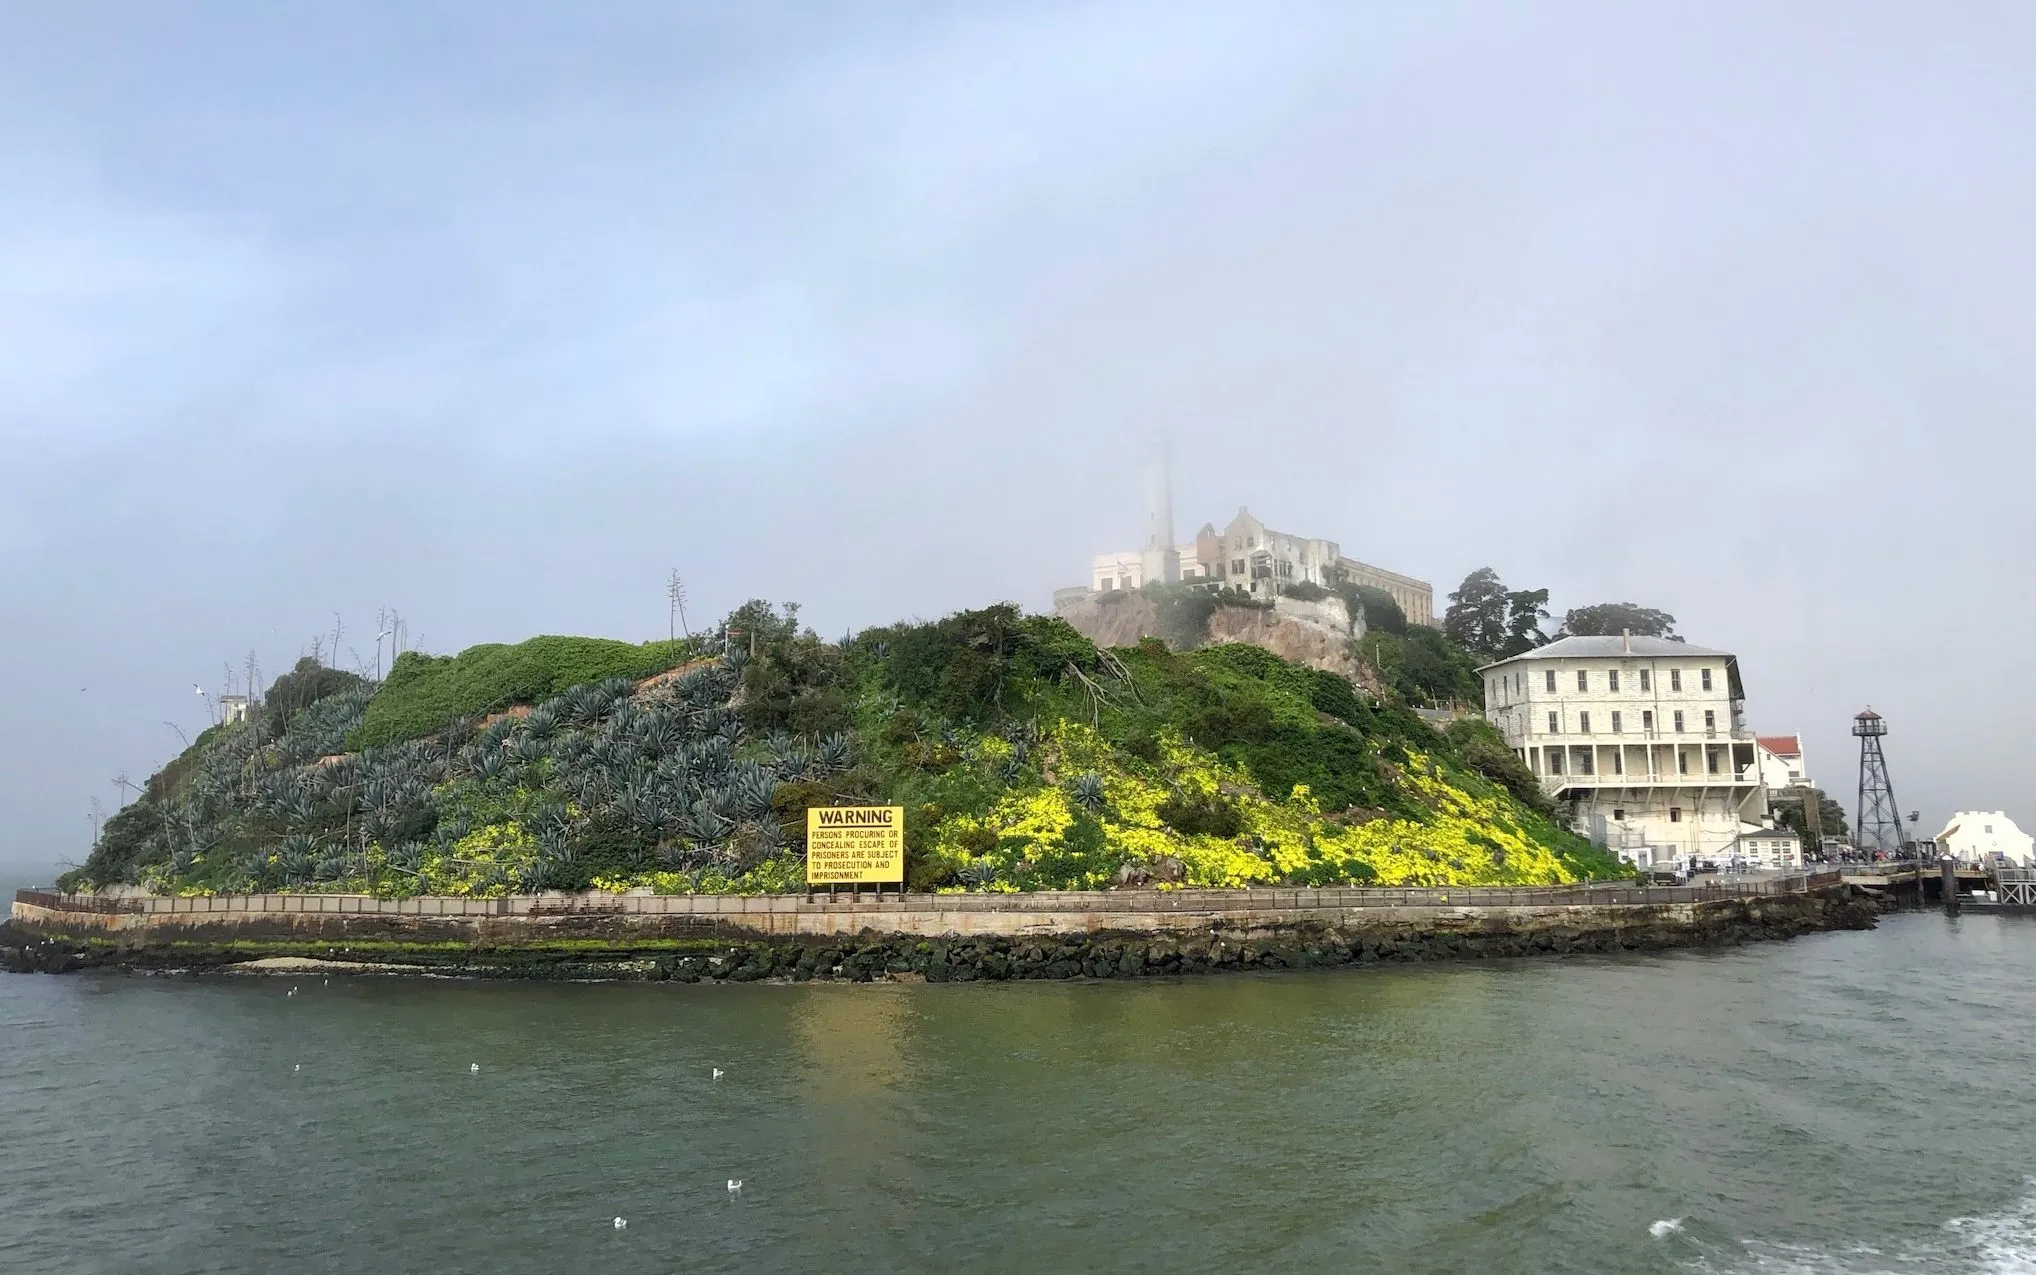 Visiting Alcatraz with kids, Family-friendly activities, Educational experience, Adventure for all ages, 2040x1280 HD Desktop